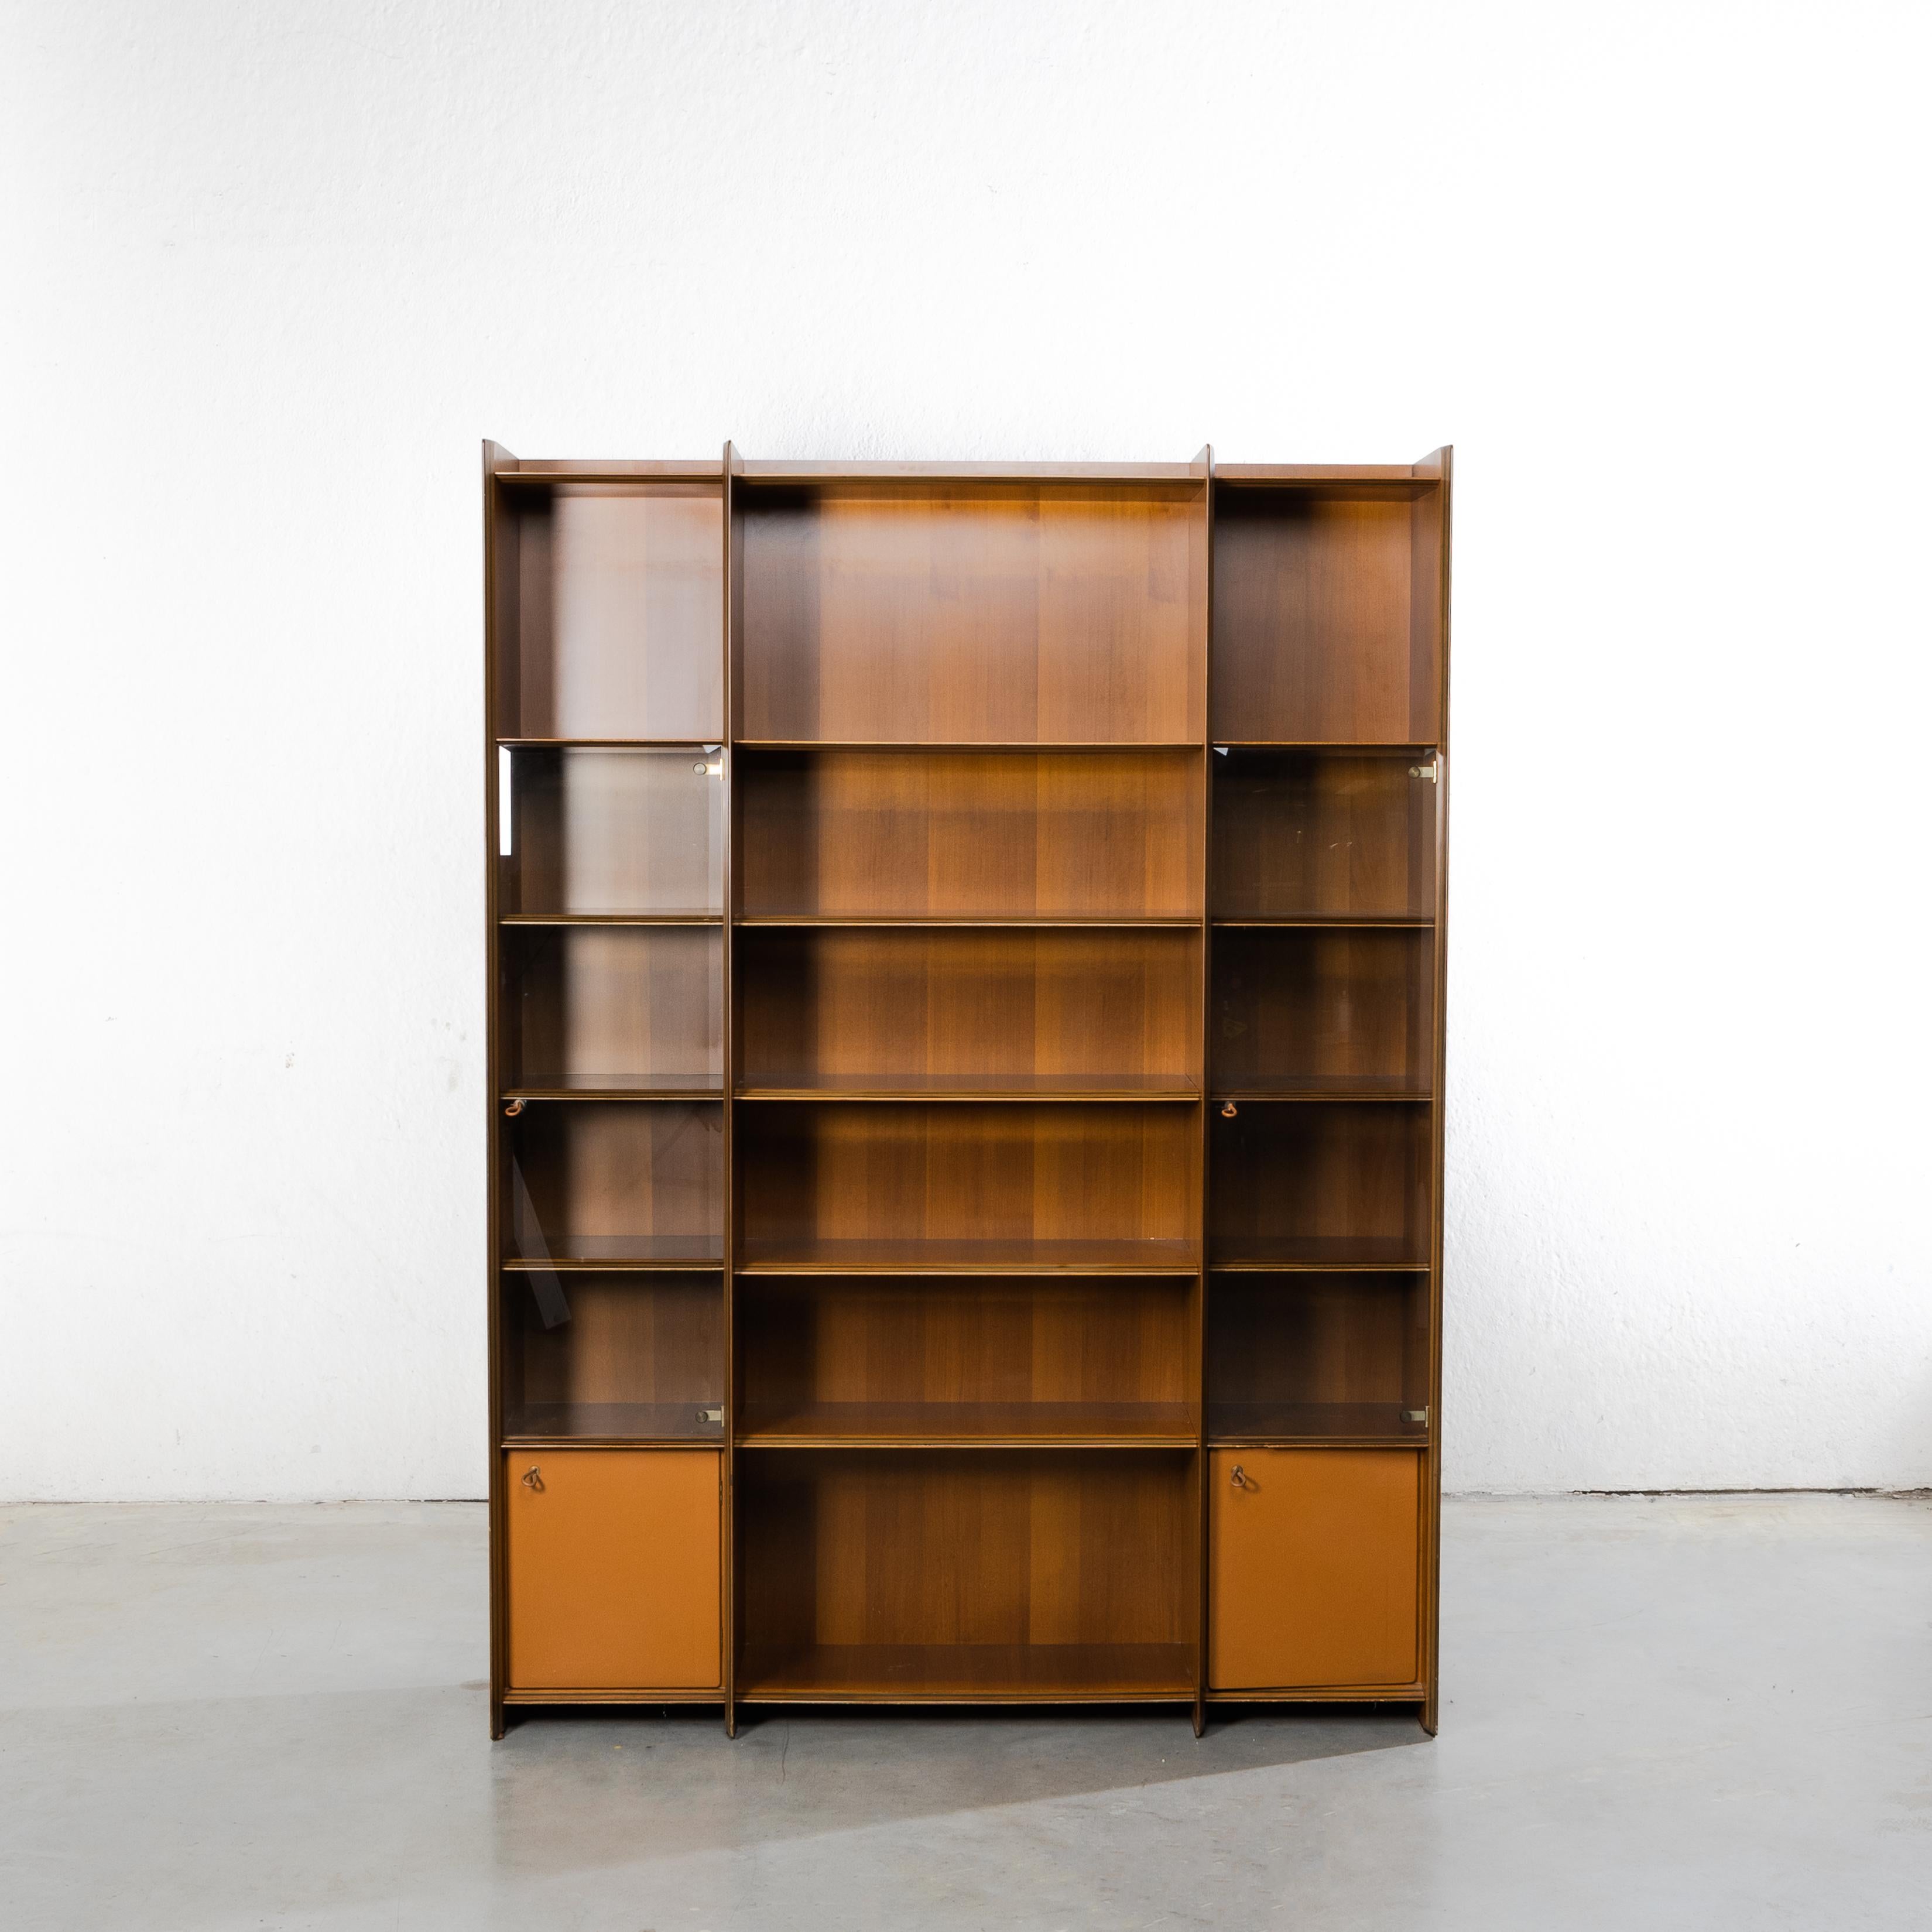 Bookcase, showcase in walnut veneered laminate.
Stiles and shelves made of layers of walnut and hardwood in contrasting colors.
The cabinet includes open storage spaces.
Two spaces closed by a bevelled glass with leather handle on the left and on